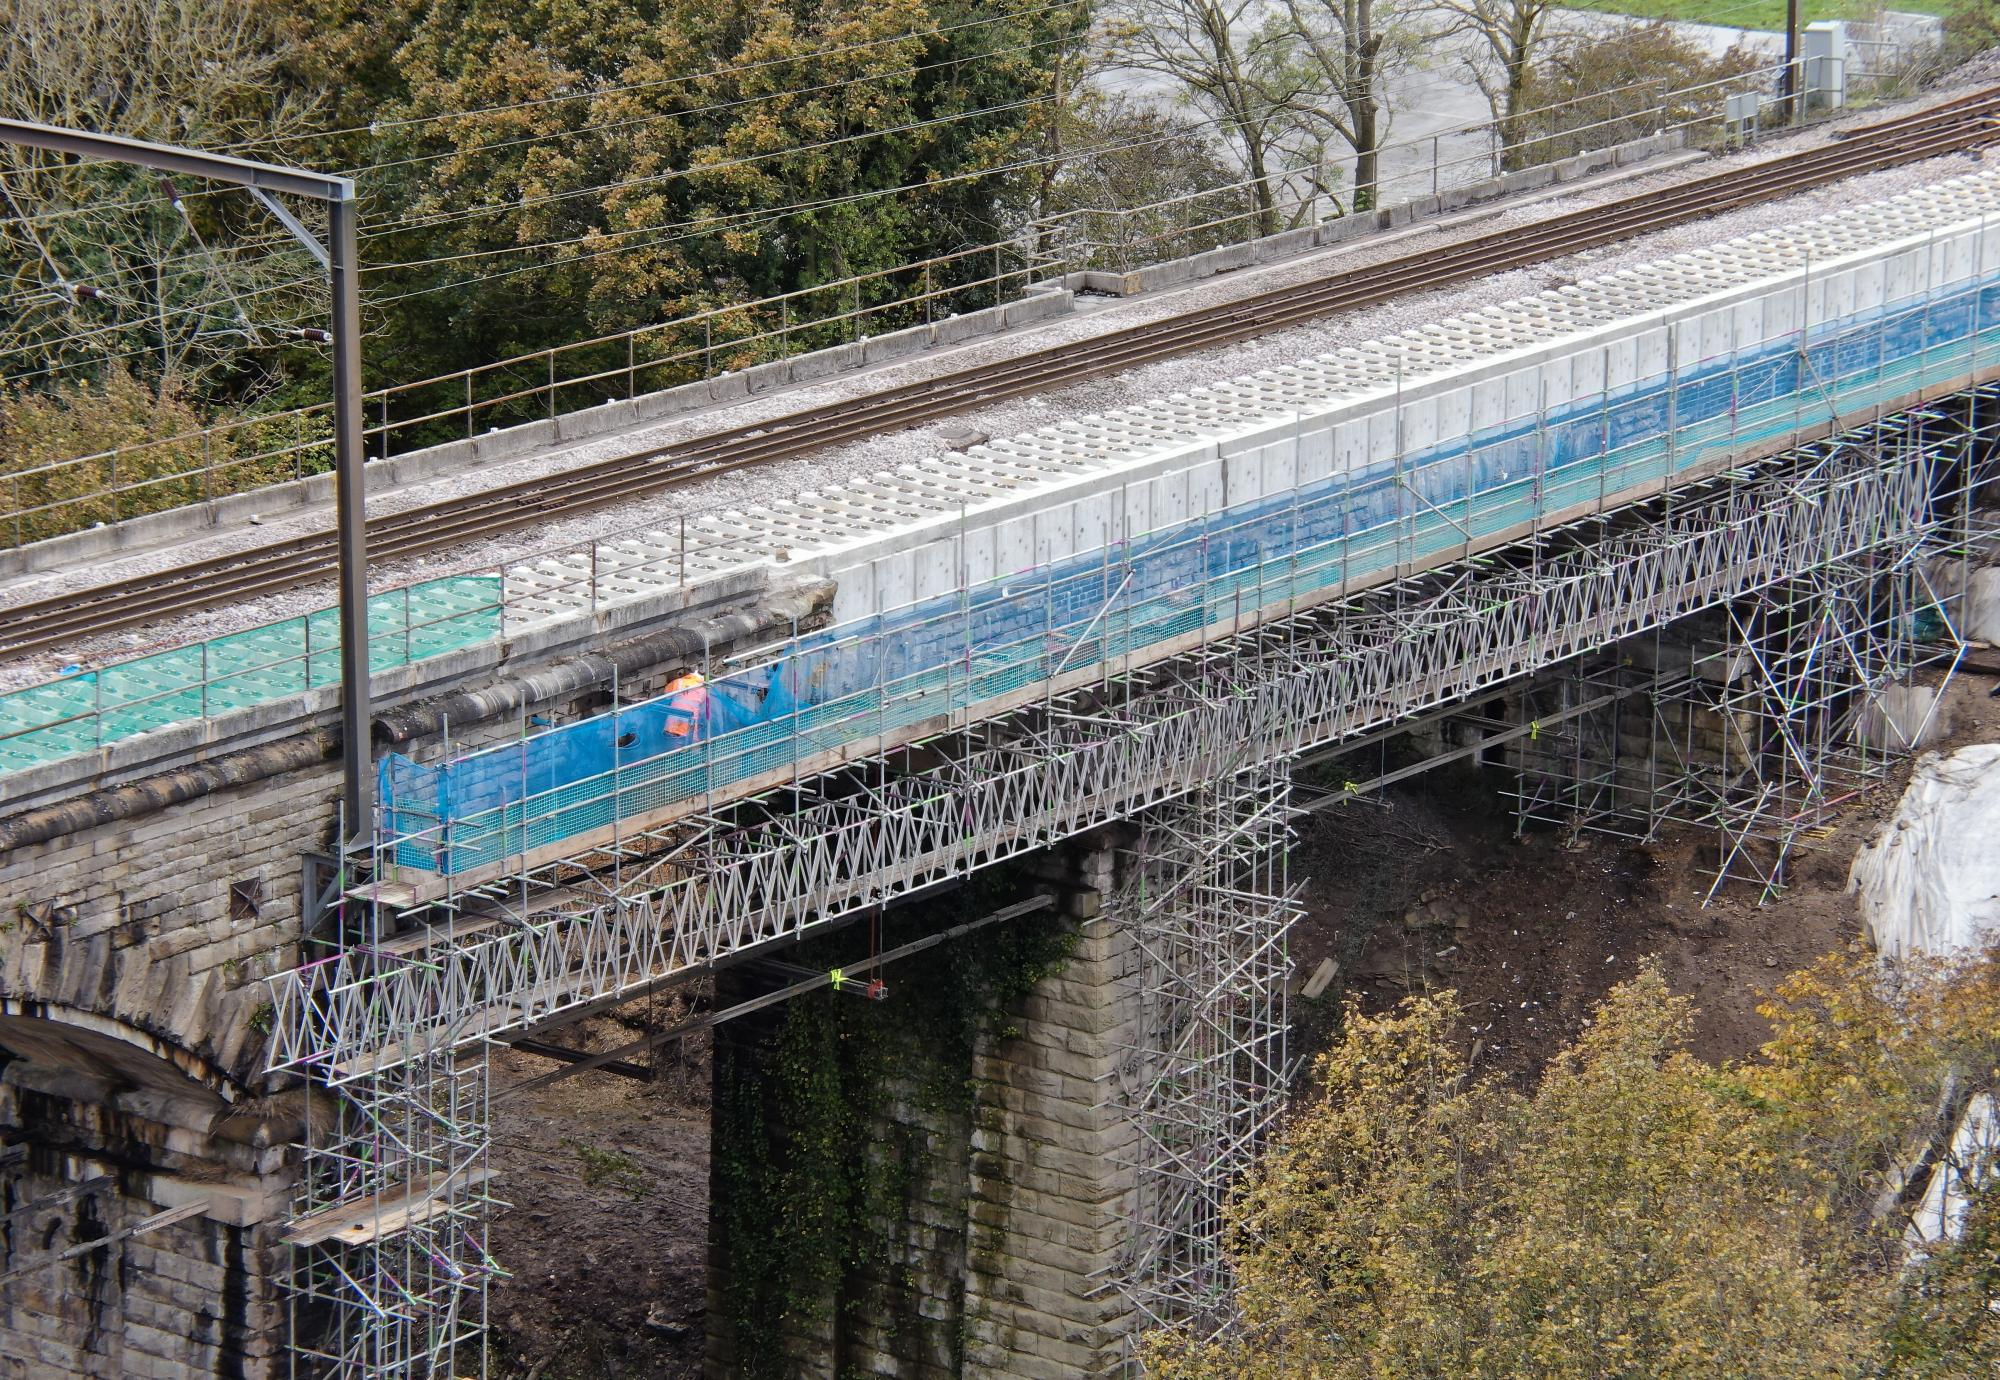 Network Rail completes repair work at Plessey Viaduct in Northumberland